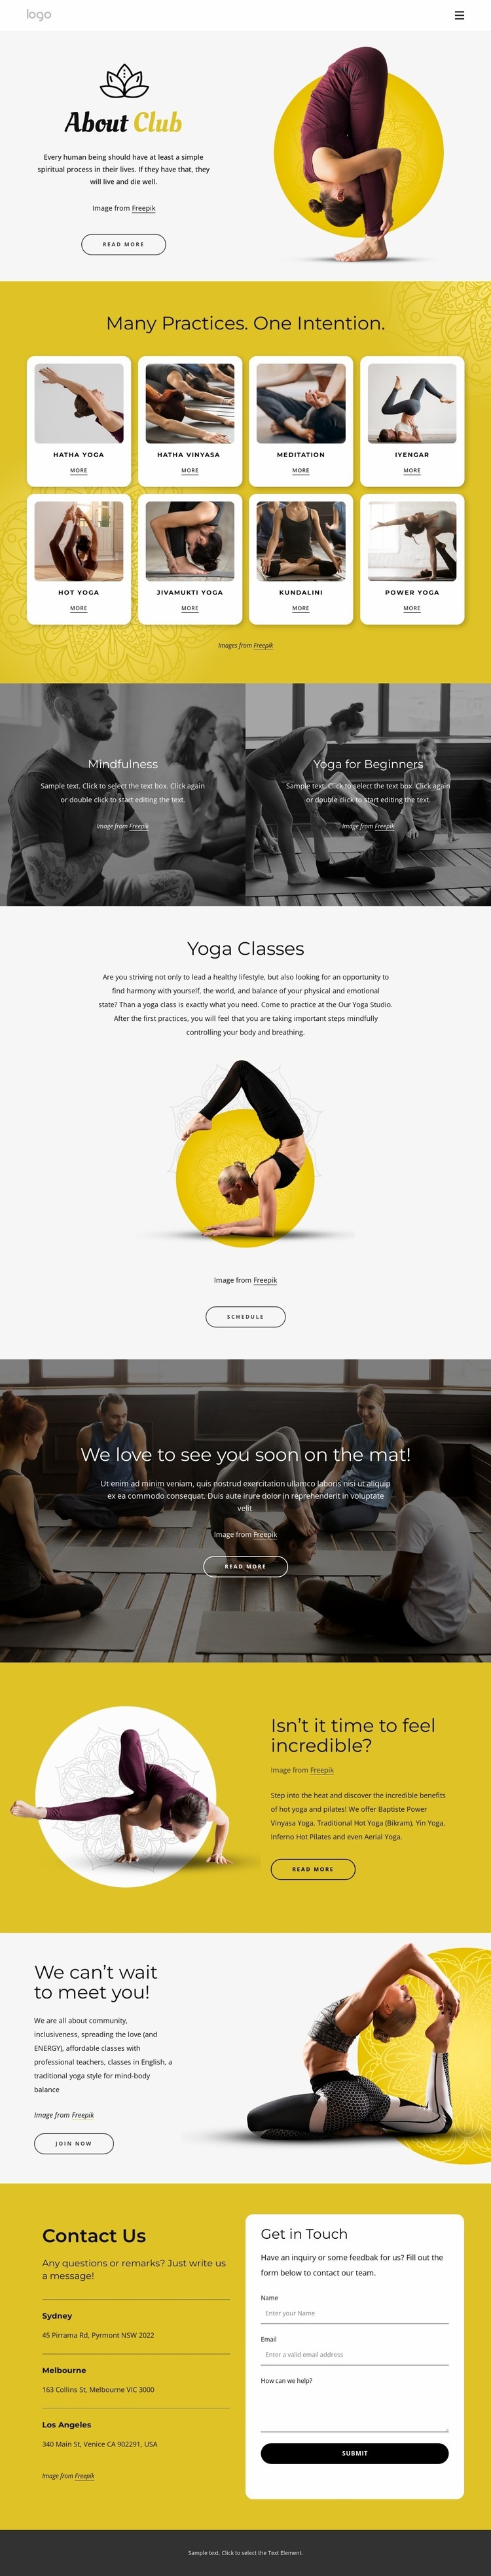 Physical, ethical and spiritual practice Squarespace Template Alternative